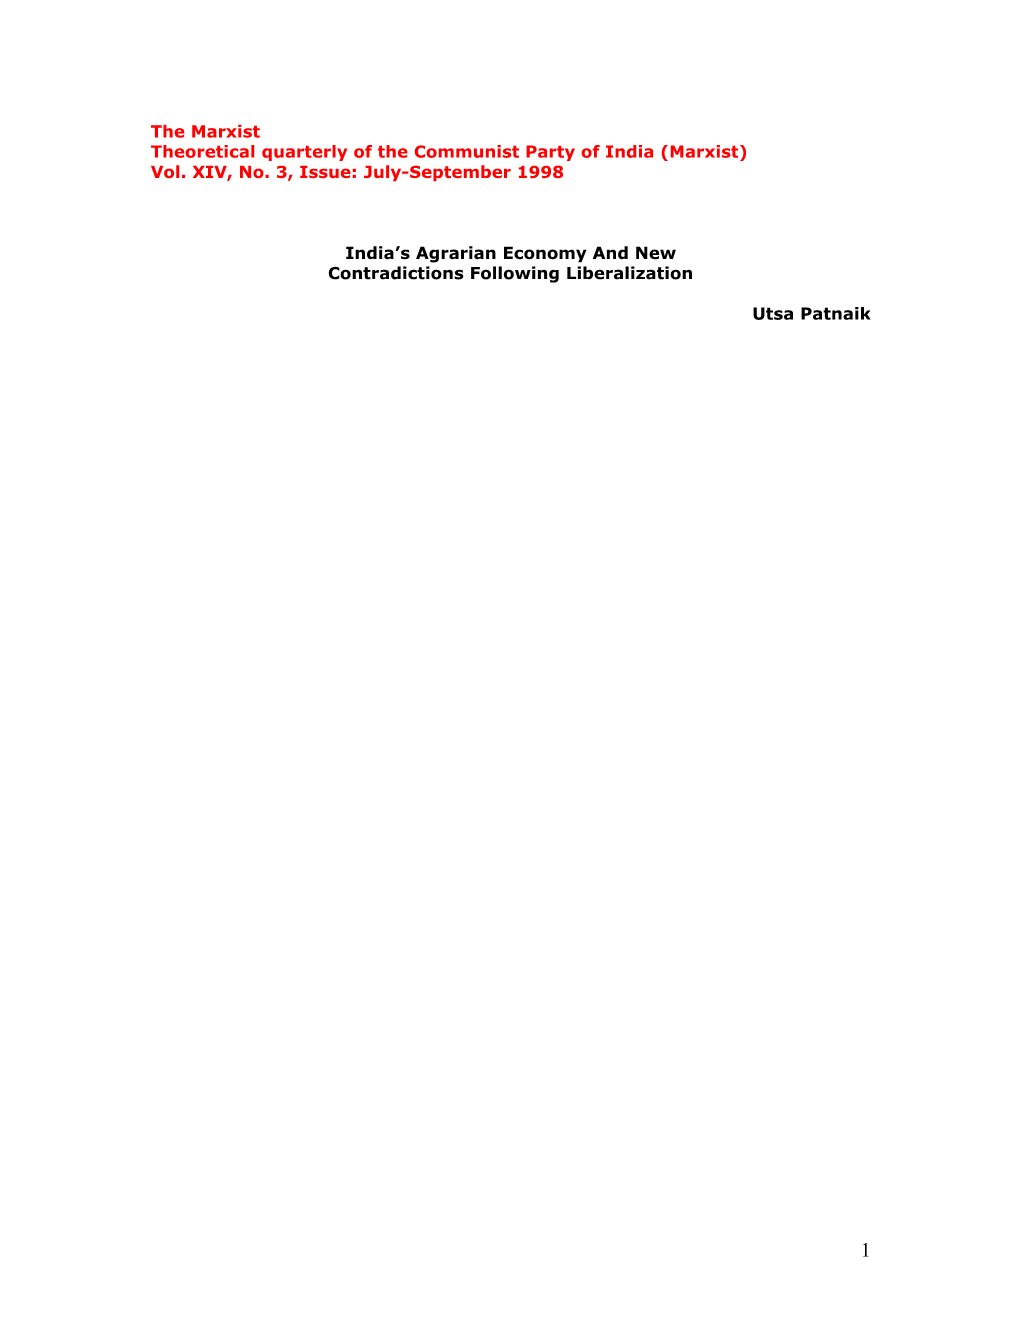 Theoretical Quarterly of the Communist Party of India (Marxist)